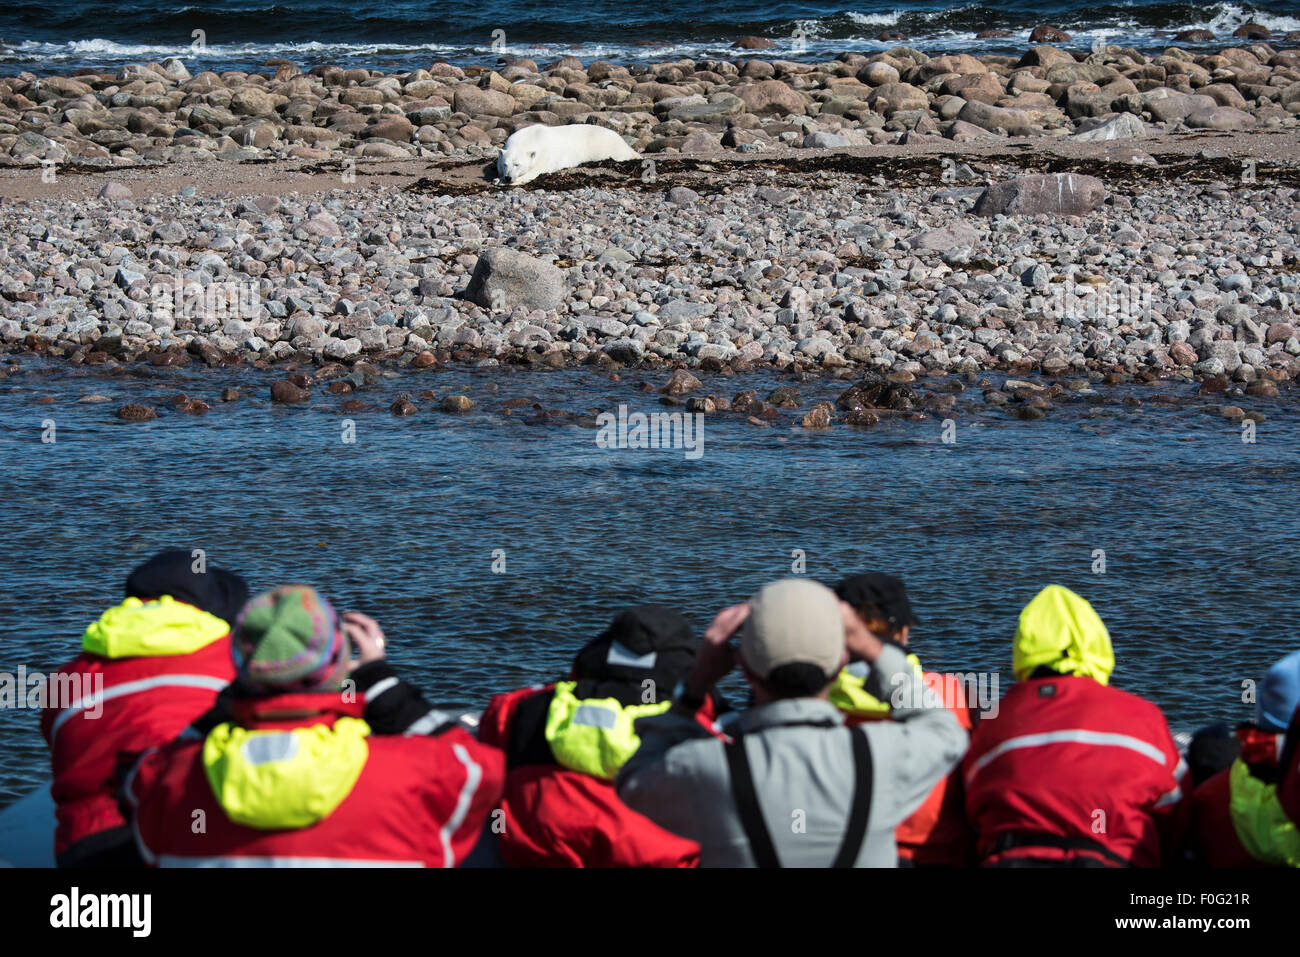 People photographing Polar Bear lying on the beach from a boat Hudson Bay, Manitoba, Canada Stock Photo